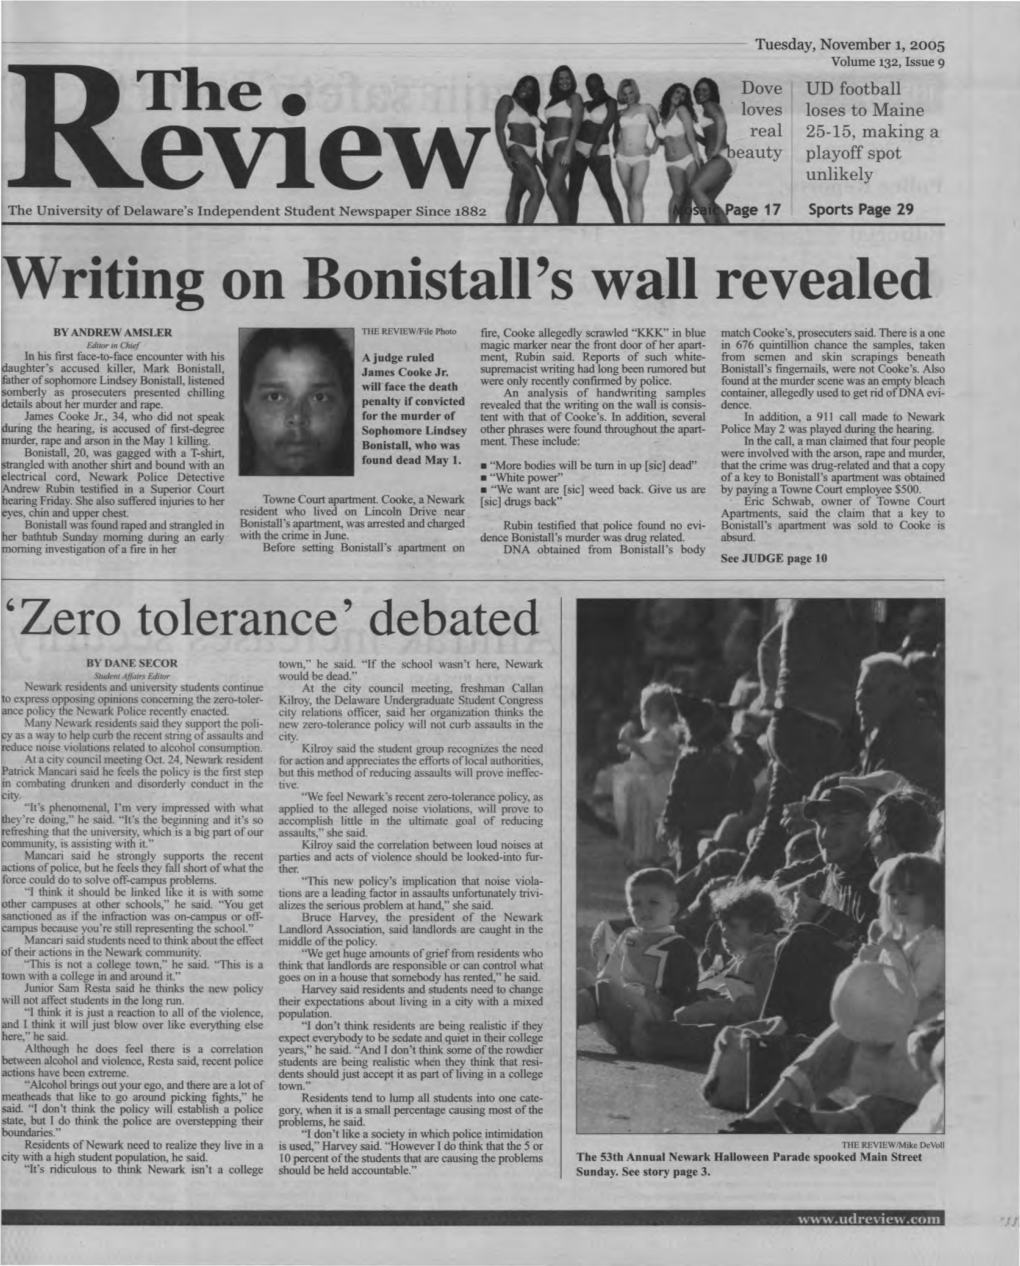 Riting on Bonistall's Wall Revealed